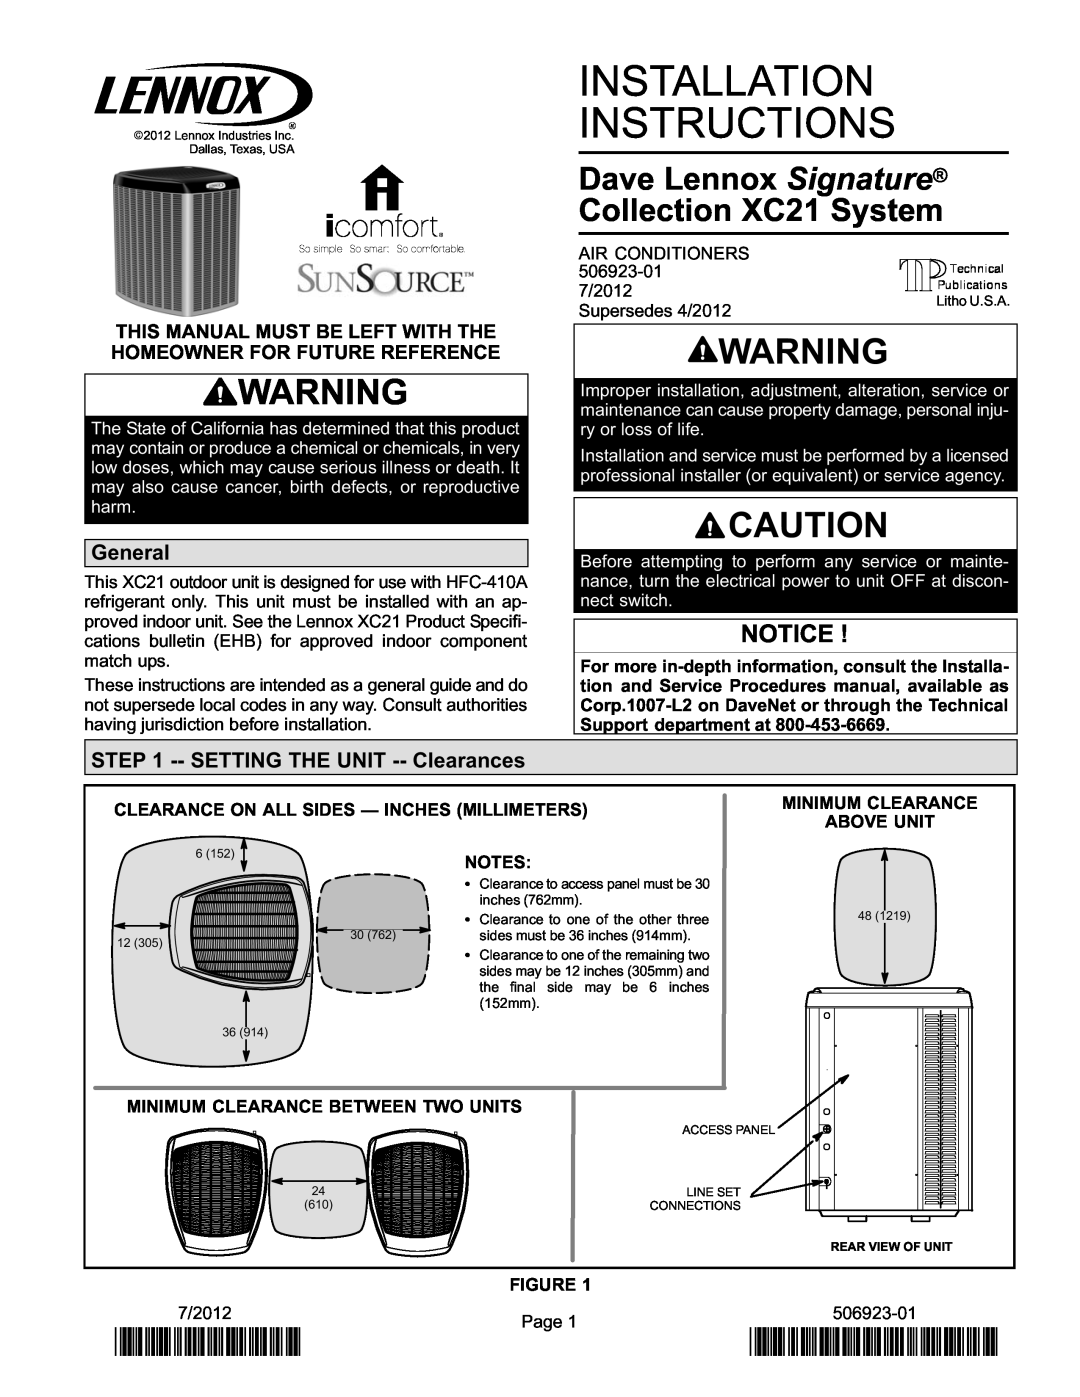 Lennox International Inc Dave Lennox Signature Collection XC21 System installation instructions General, 2P72012 